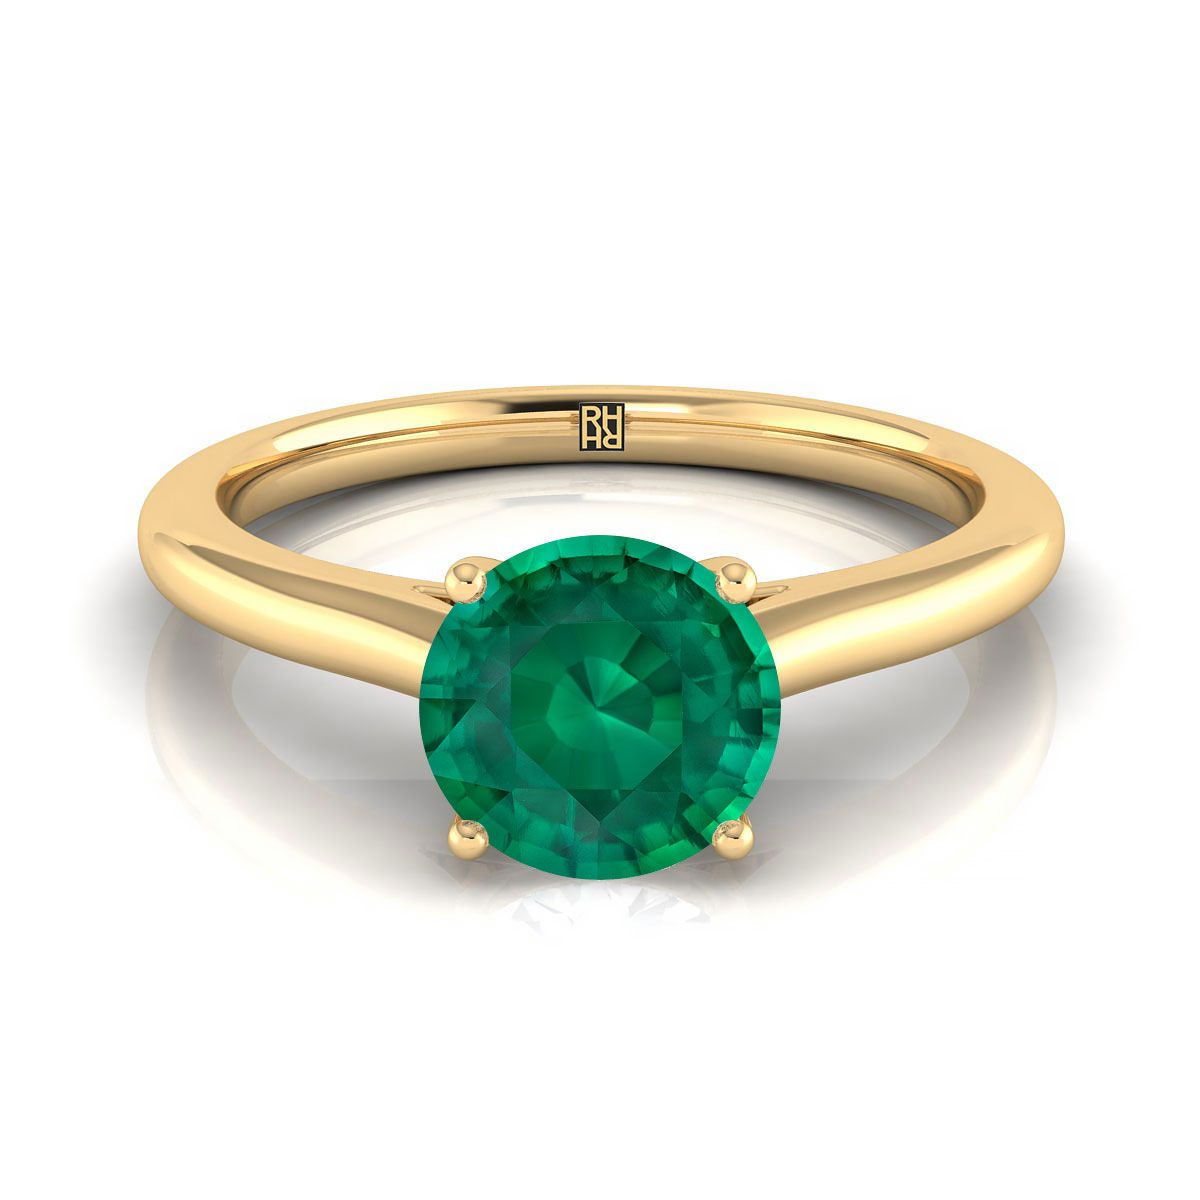 18K Yellow Gold Round Brilliant Emerald Pinched Comfort Fit Claw Prong Solitaire Engagement Ring